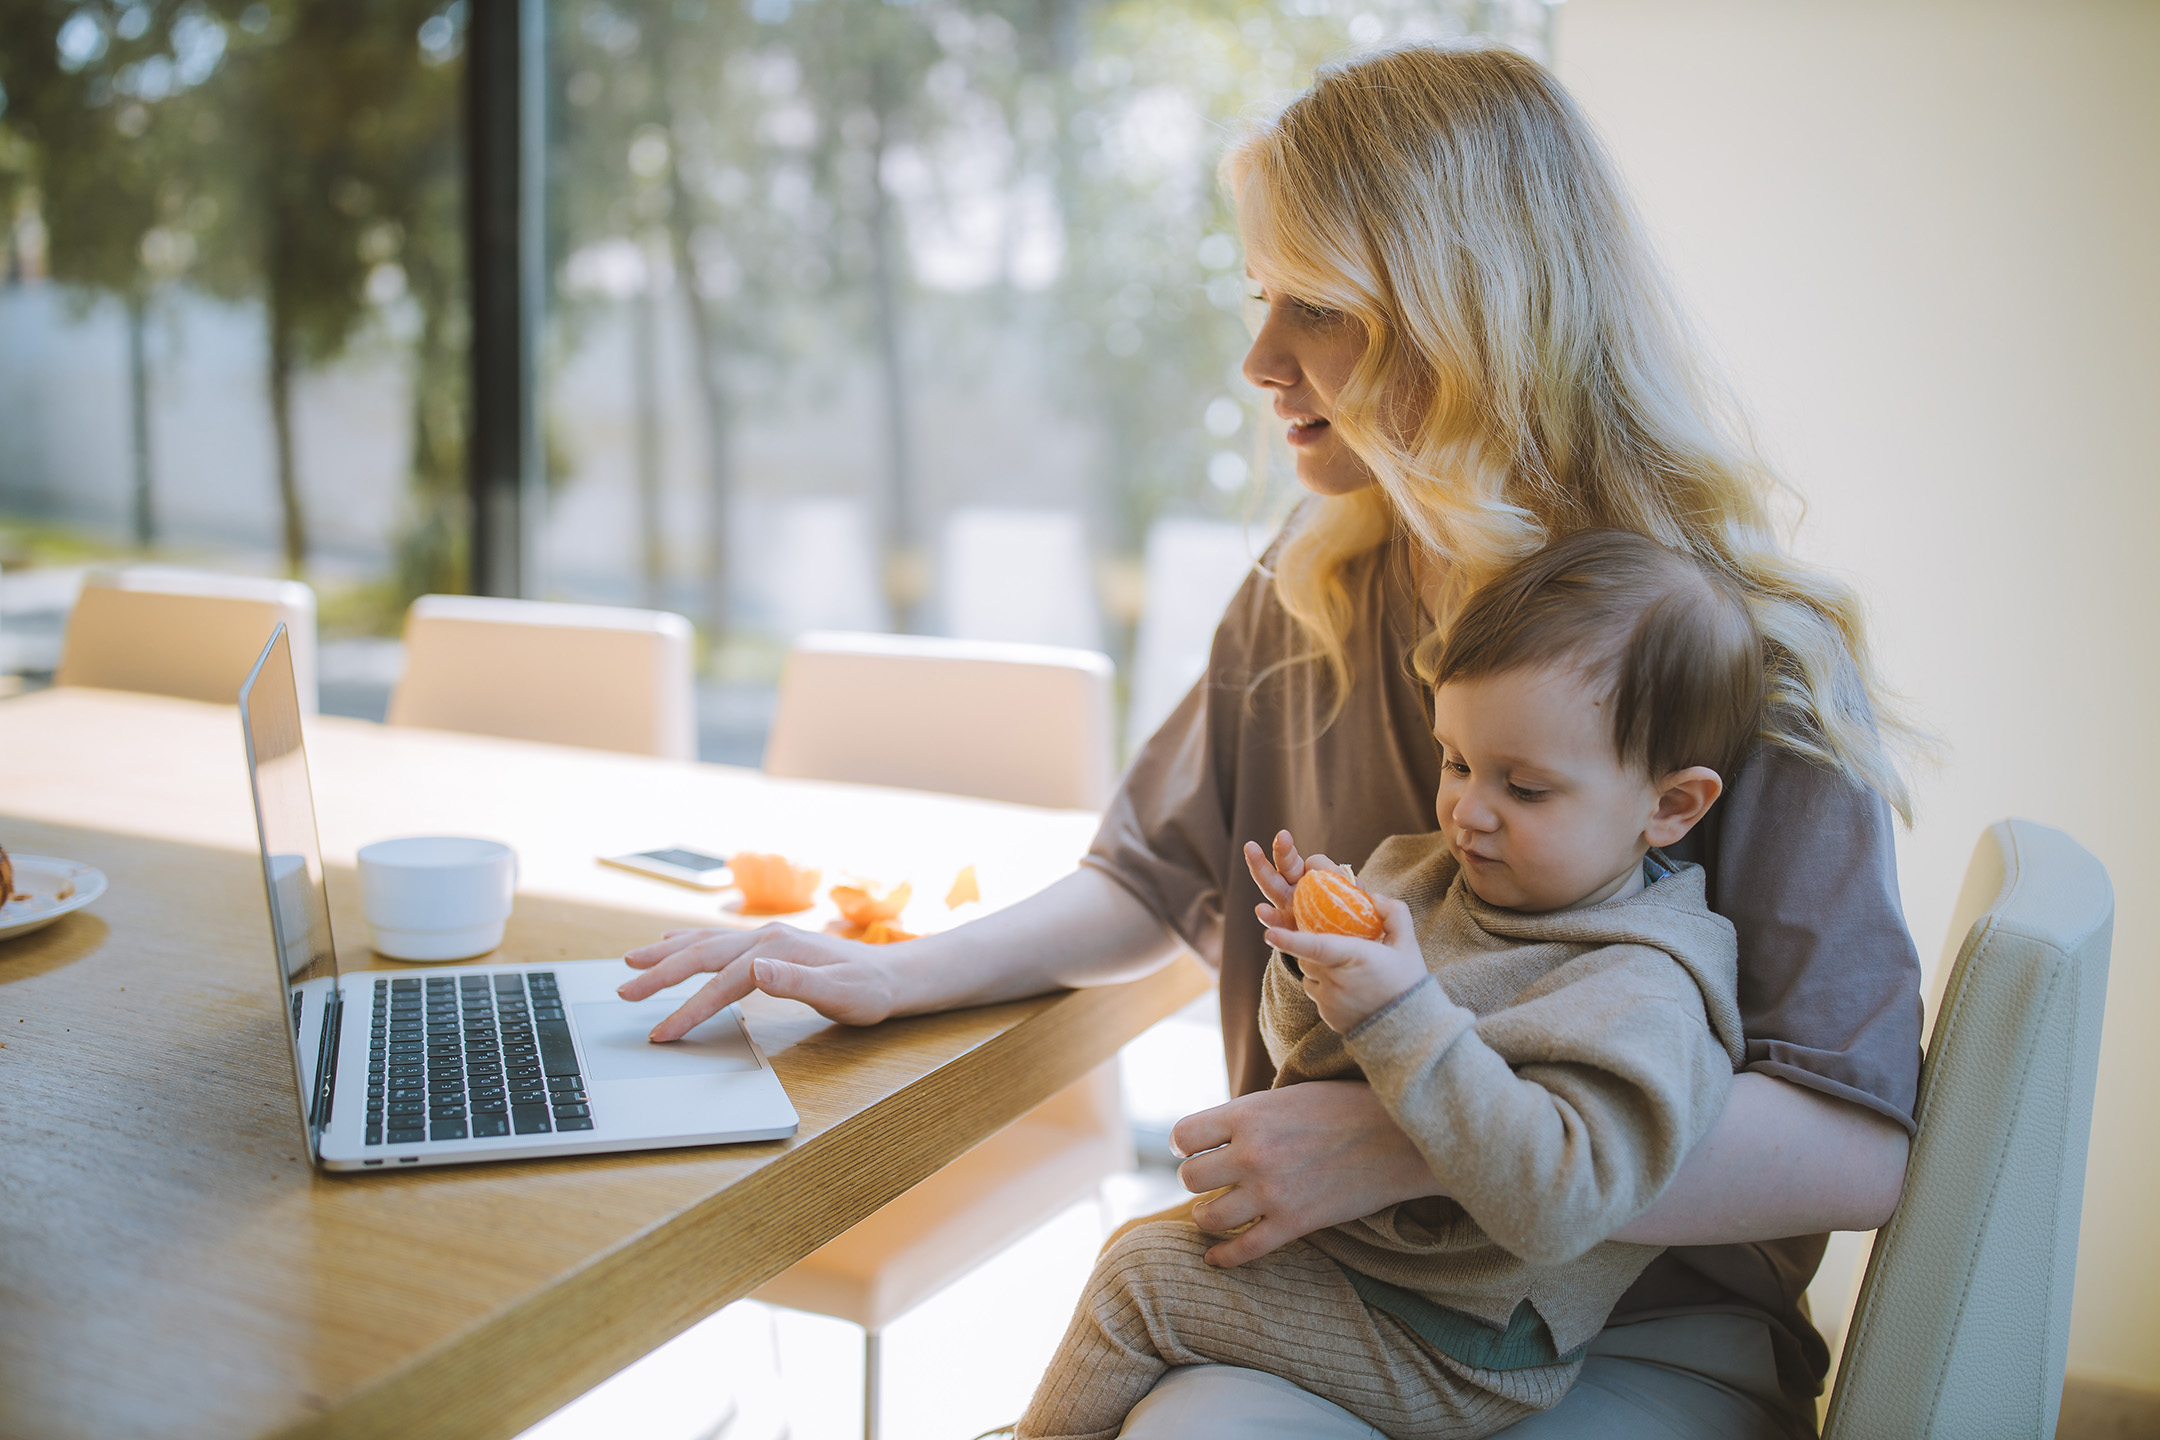 10 Good Side Jobs for Working Moms and Dads